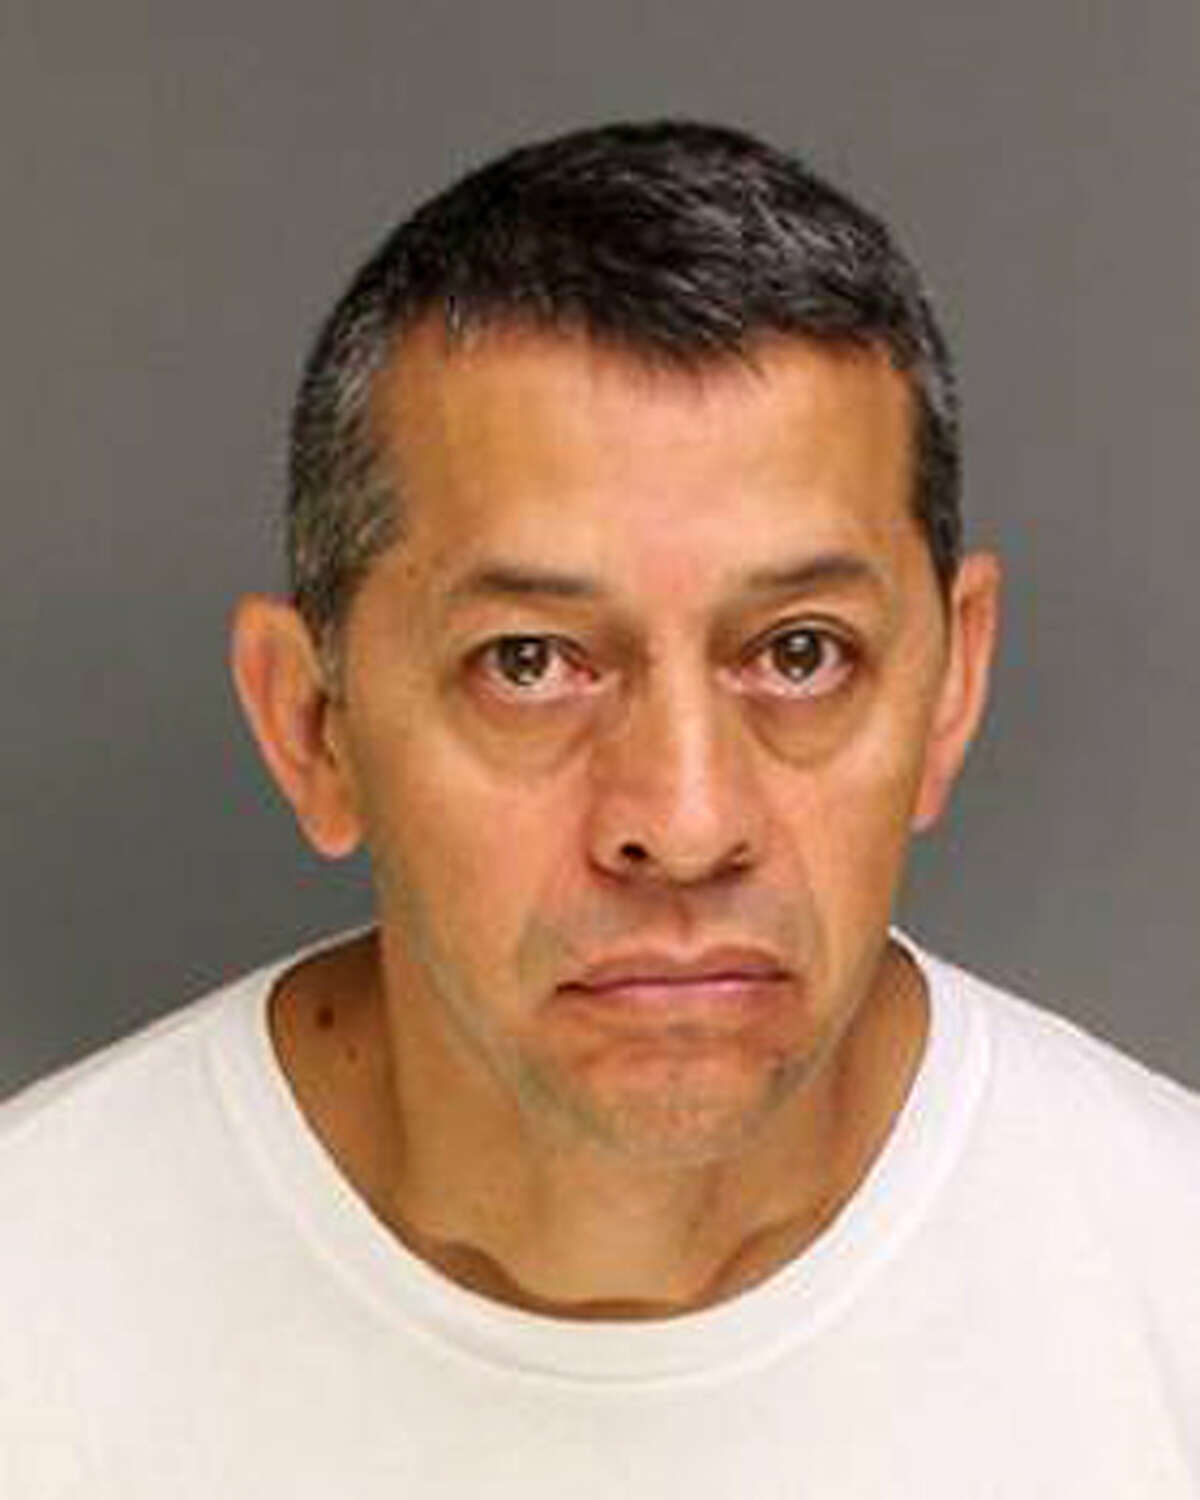 Gonzalo Flores, a former St. Vincent’s Medical Center male nursing assistant awaiting trial for allegedly sexually assaulting a patient in June 2014 was charged Tuesday, Nov. 25th, with raping another male patient back in March.